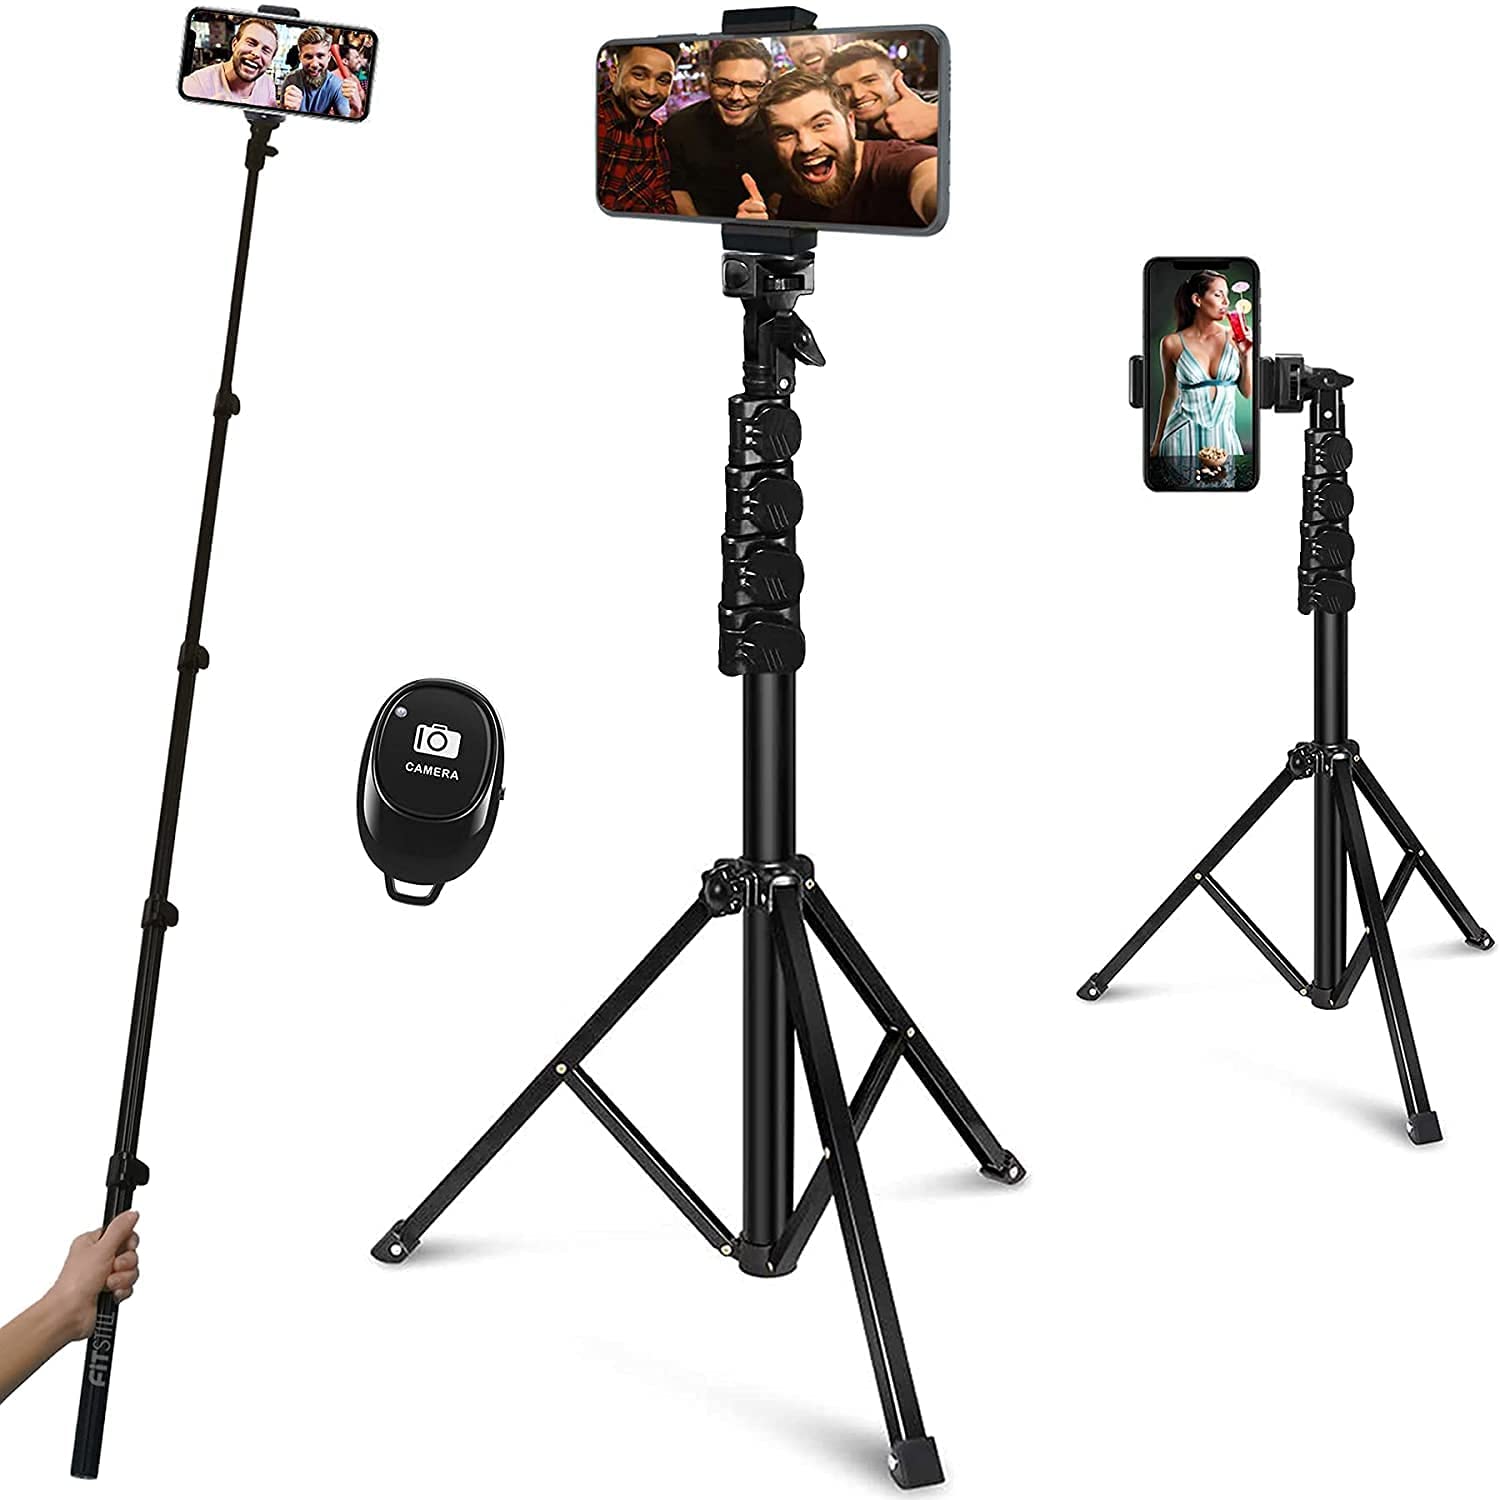 FitStill 61-inch Selfie Stick Tripod, Detachable and Extendable